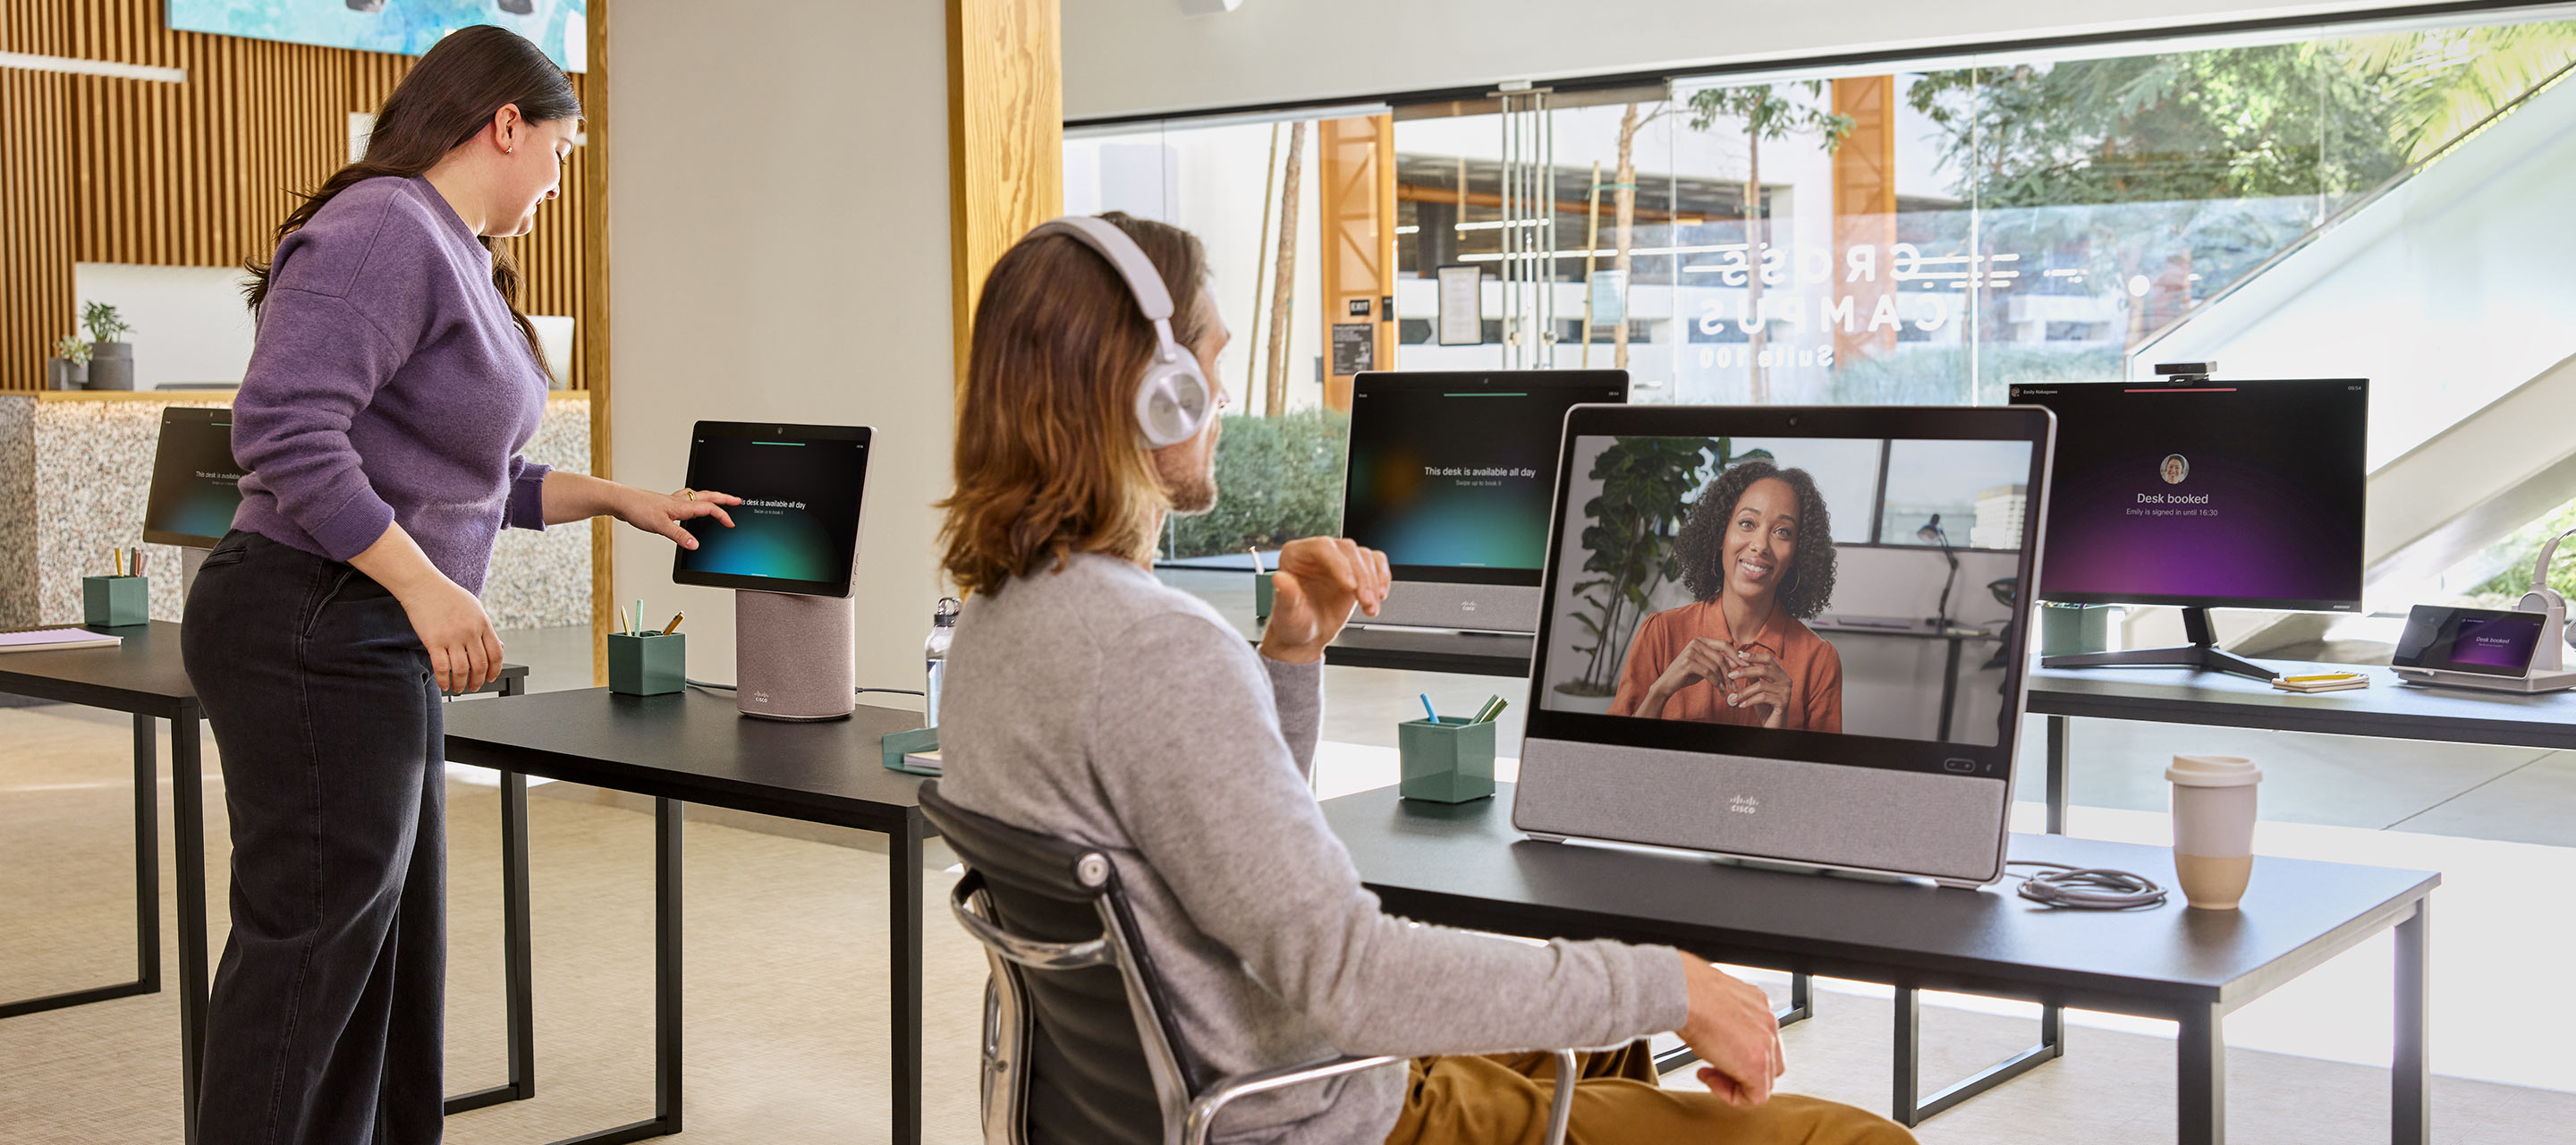 Sitting at a desk in an open office, a professional wearing a headset video conferences with a colleague.